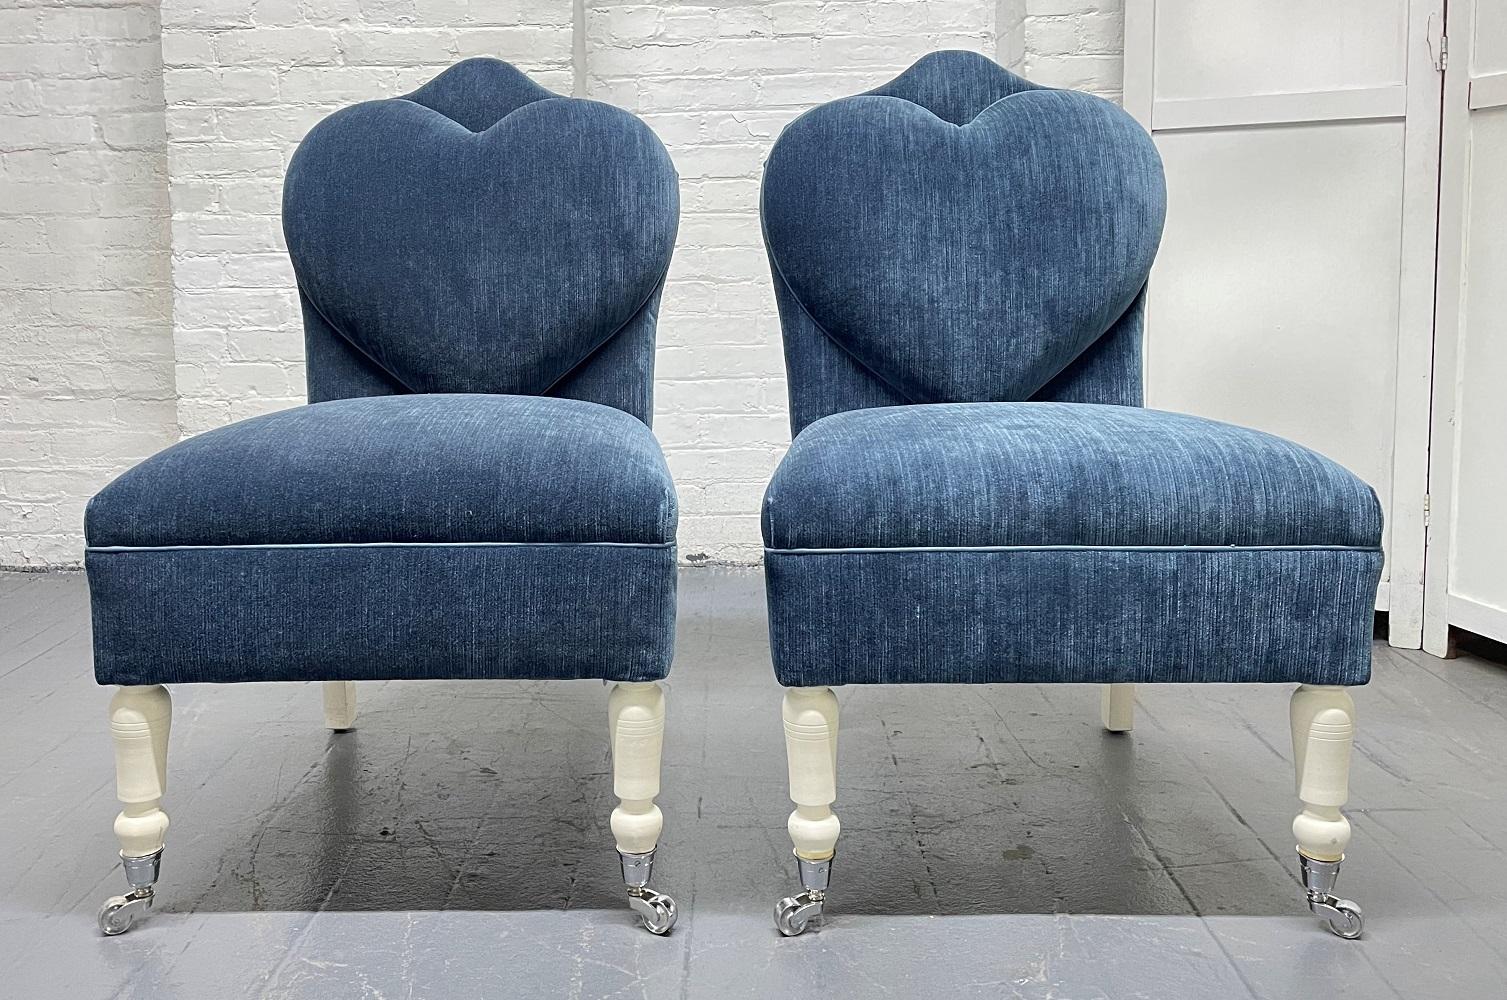 Pair of Flavor Custom Design lounge / slipper chairs. Chairs have painted wood legs, front legs have casters, and the chairs are blue velvet upholstery. Has a wonderful heart shaped back. Well designed.